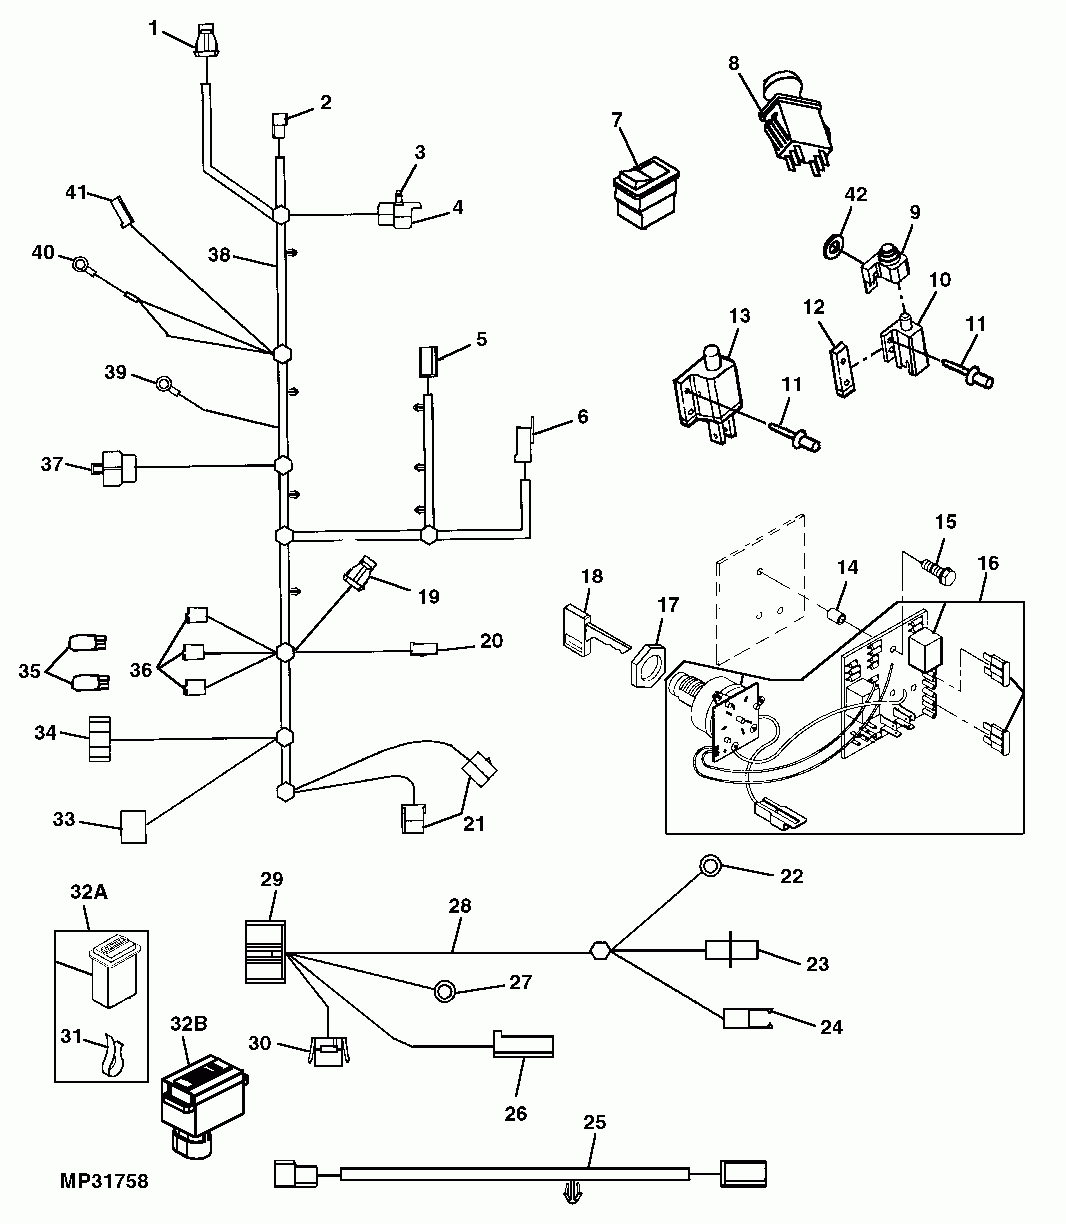 I Have A Deere L120 Lawn Mower And The Pto Has Gone Haywire. Took - Pto Switch Wiring Diagram